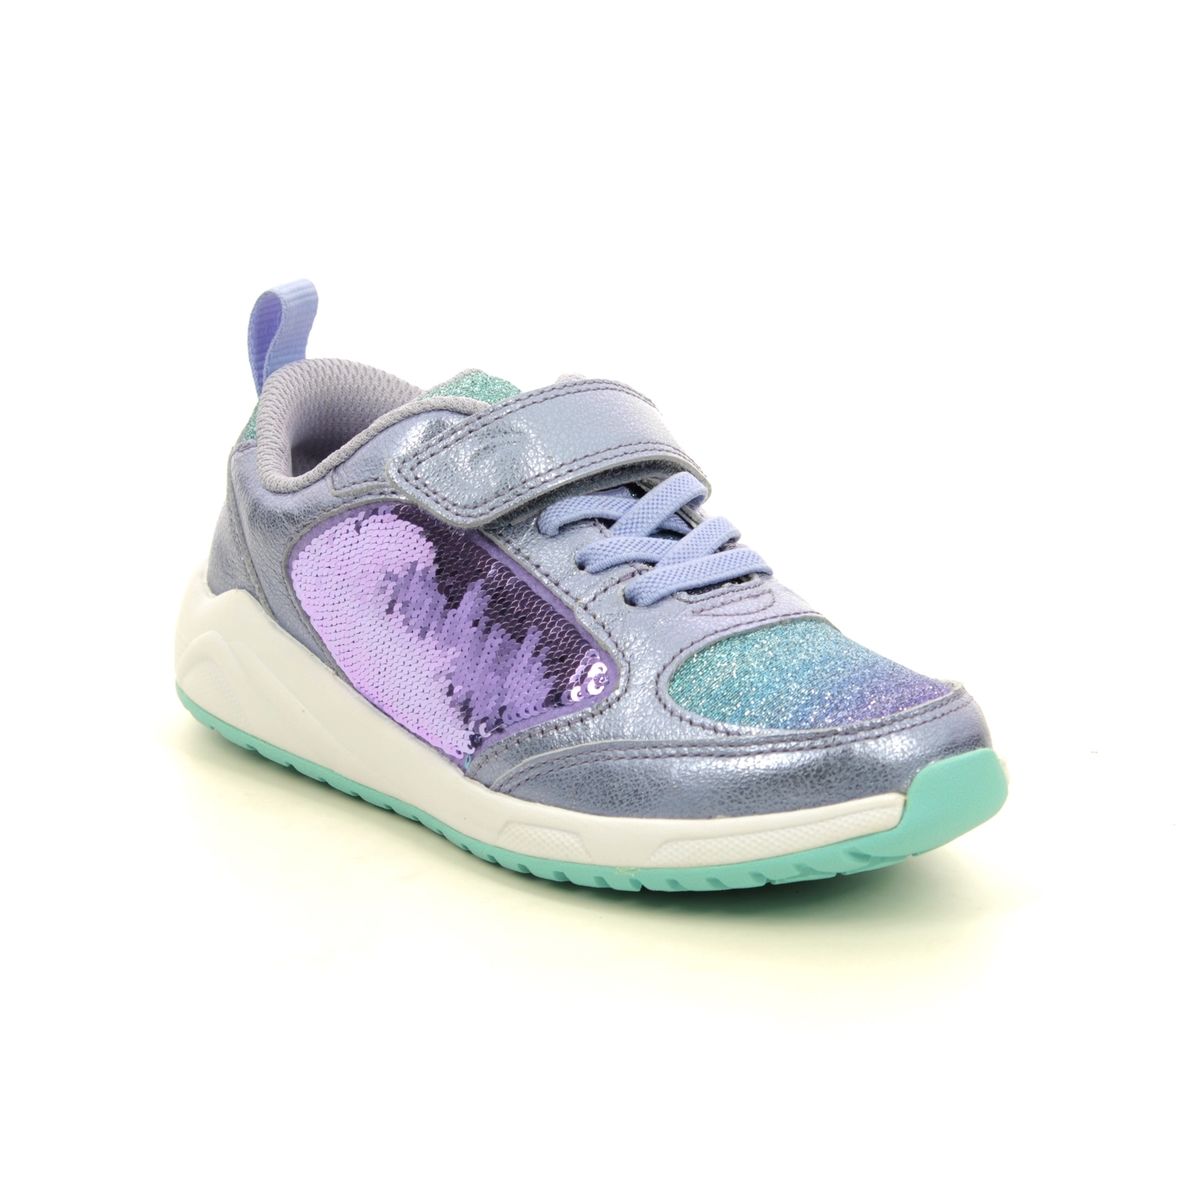 Clarks Aeon Flex K Lilac Kids Girls Trainers 541146F In Size 10.5 In Plain Lilac F Width Fitting Regular Fit For kids